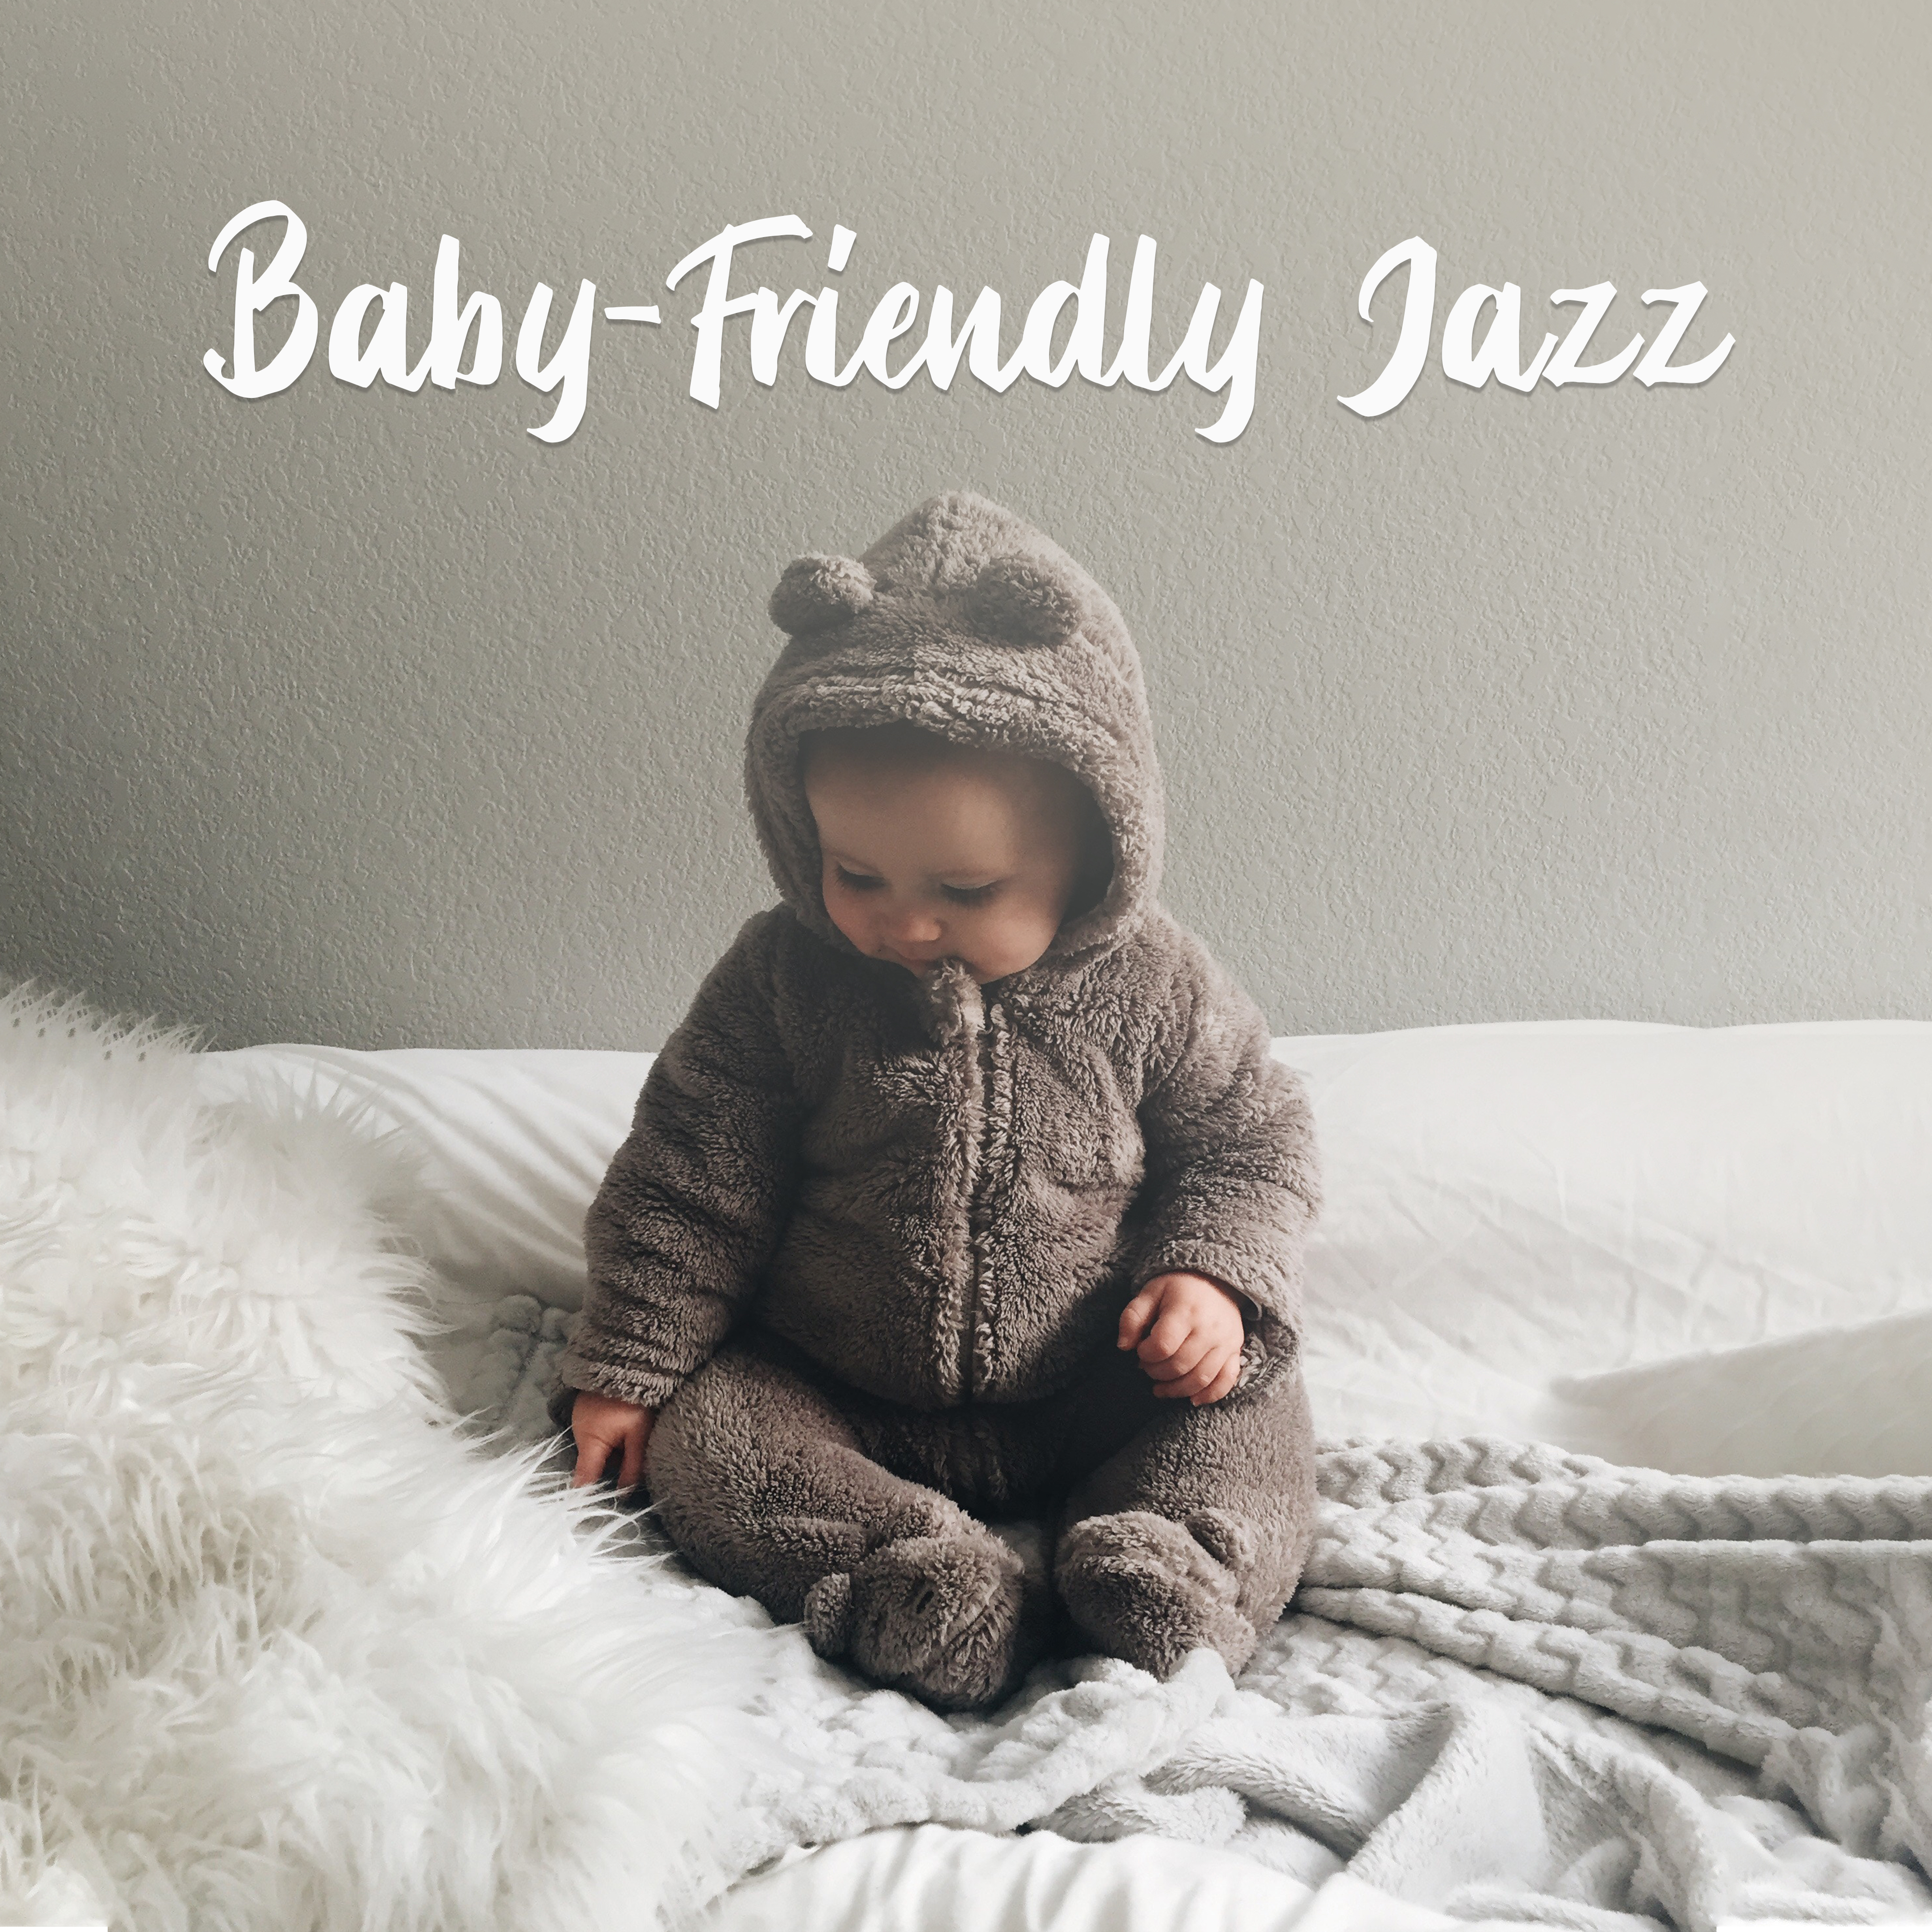 Baby-Friendly Jazz: Positive, Joyful and Carefree Jazz Melodies for Your Little One, for Rest, Relaxation or Play with Your Child